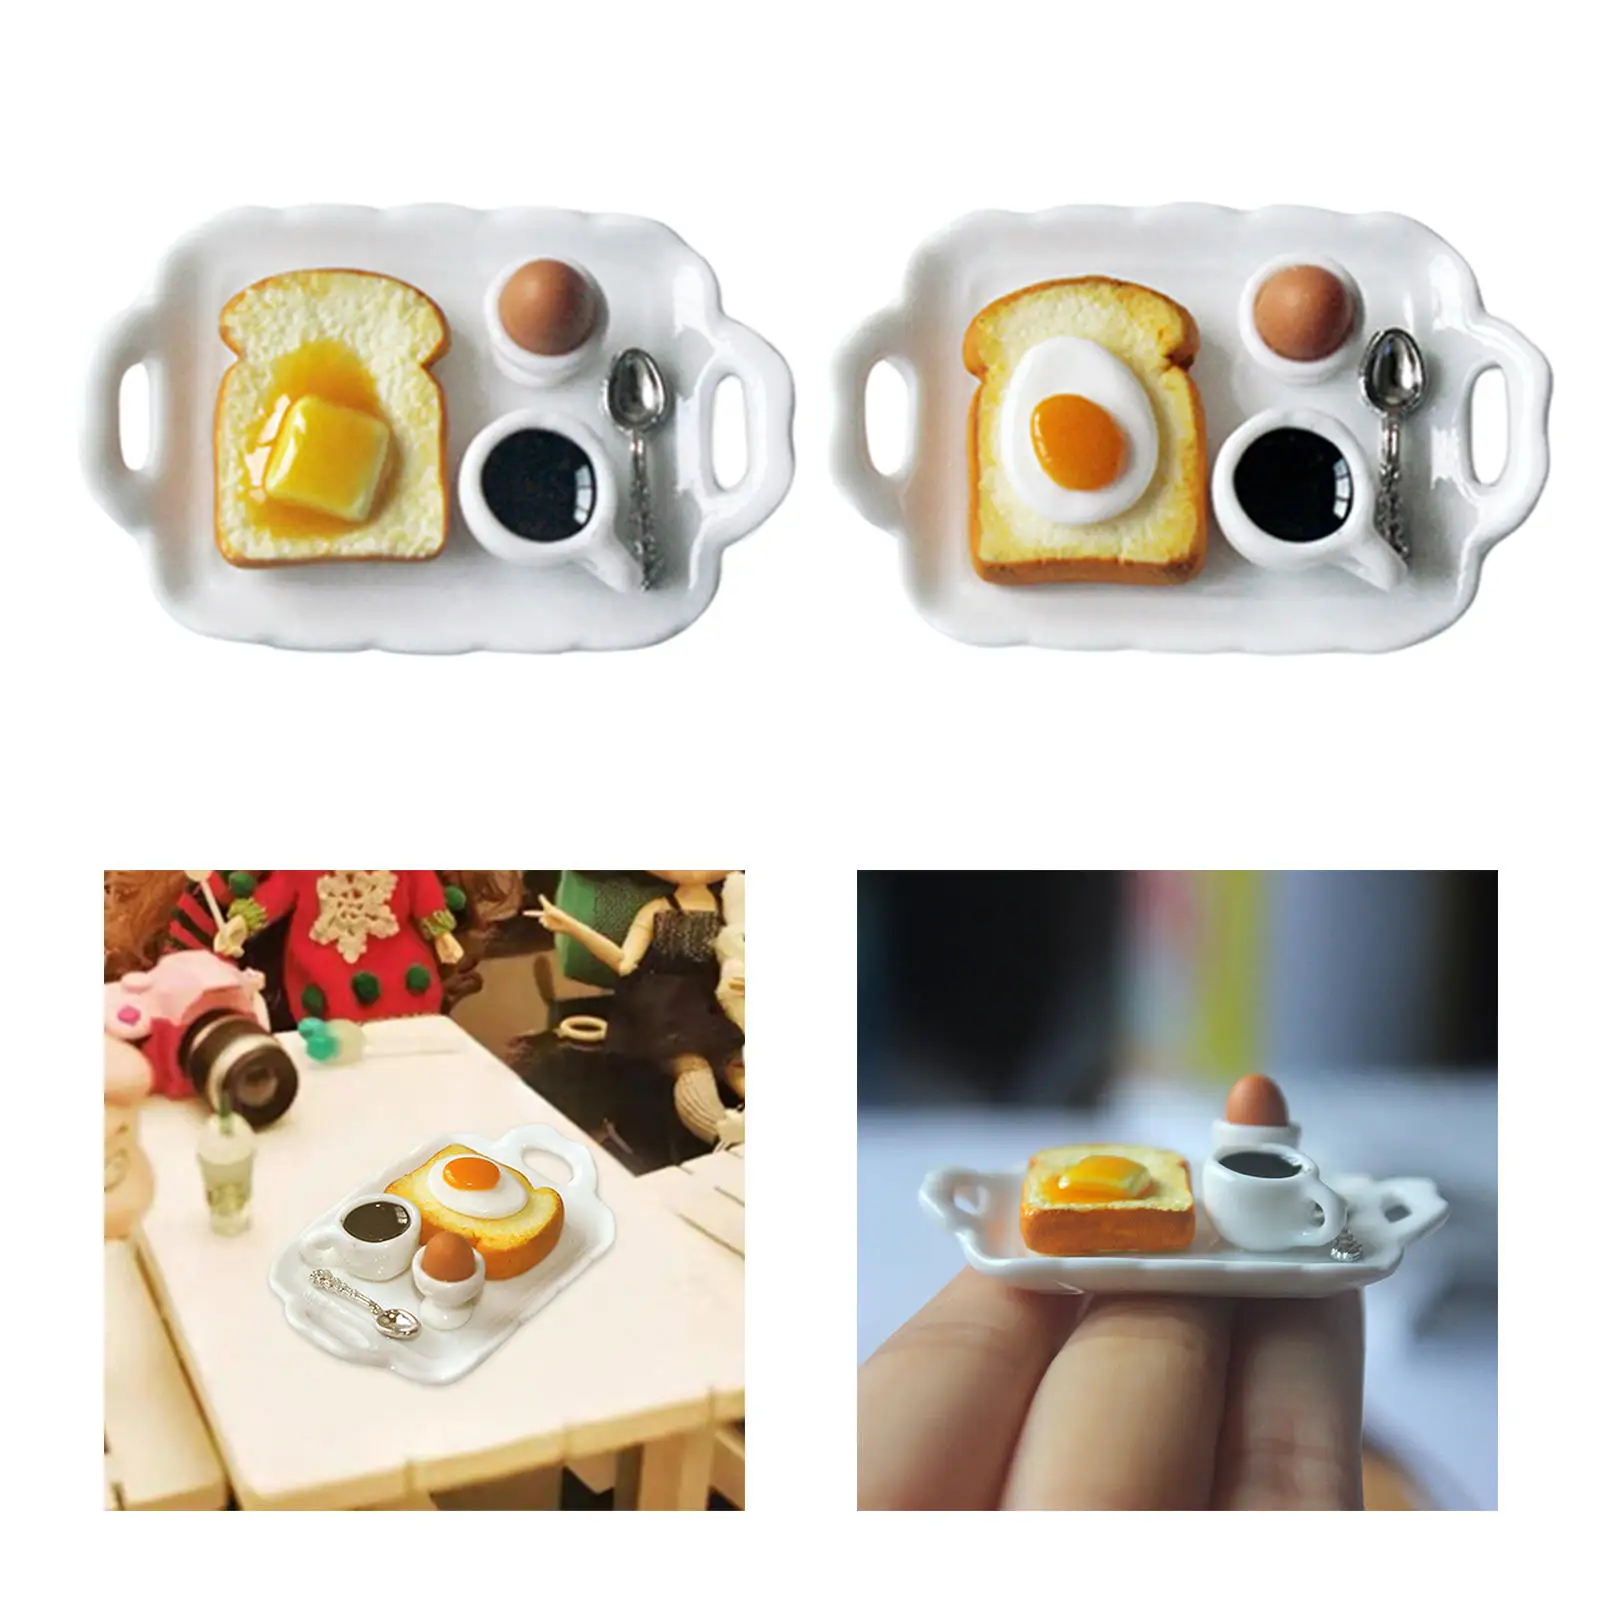 1/12 Scale Doll House Breakfast Plate Doll House Decration Pretend Play Toy for Kids